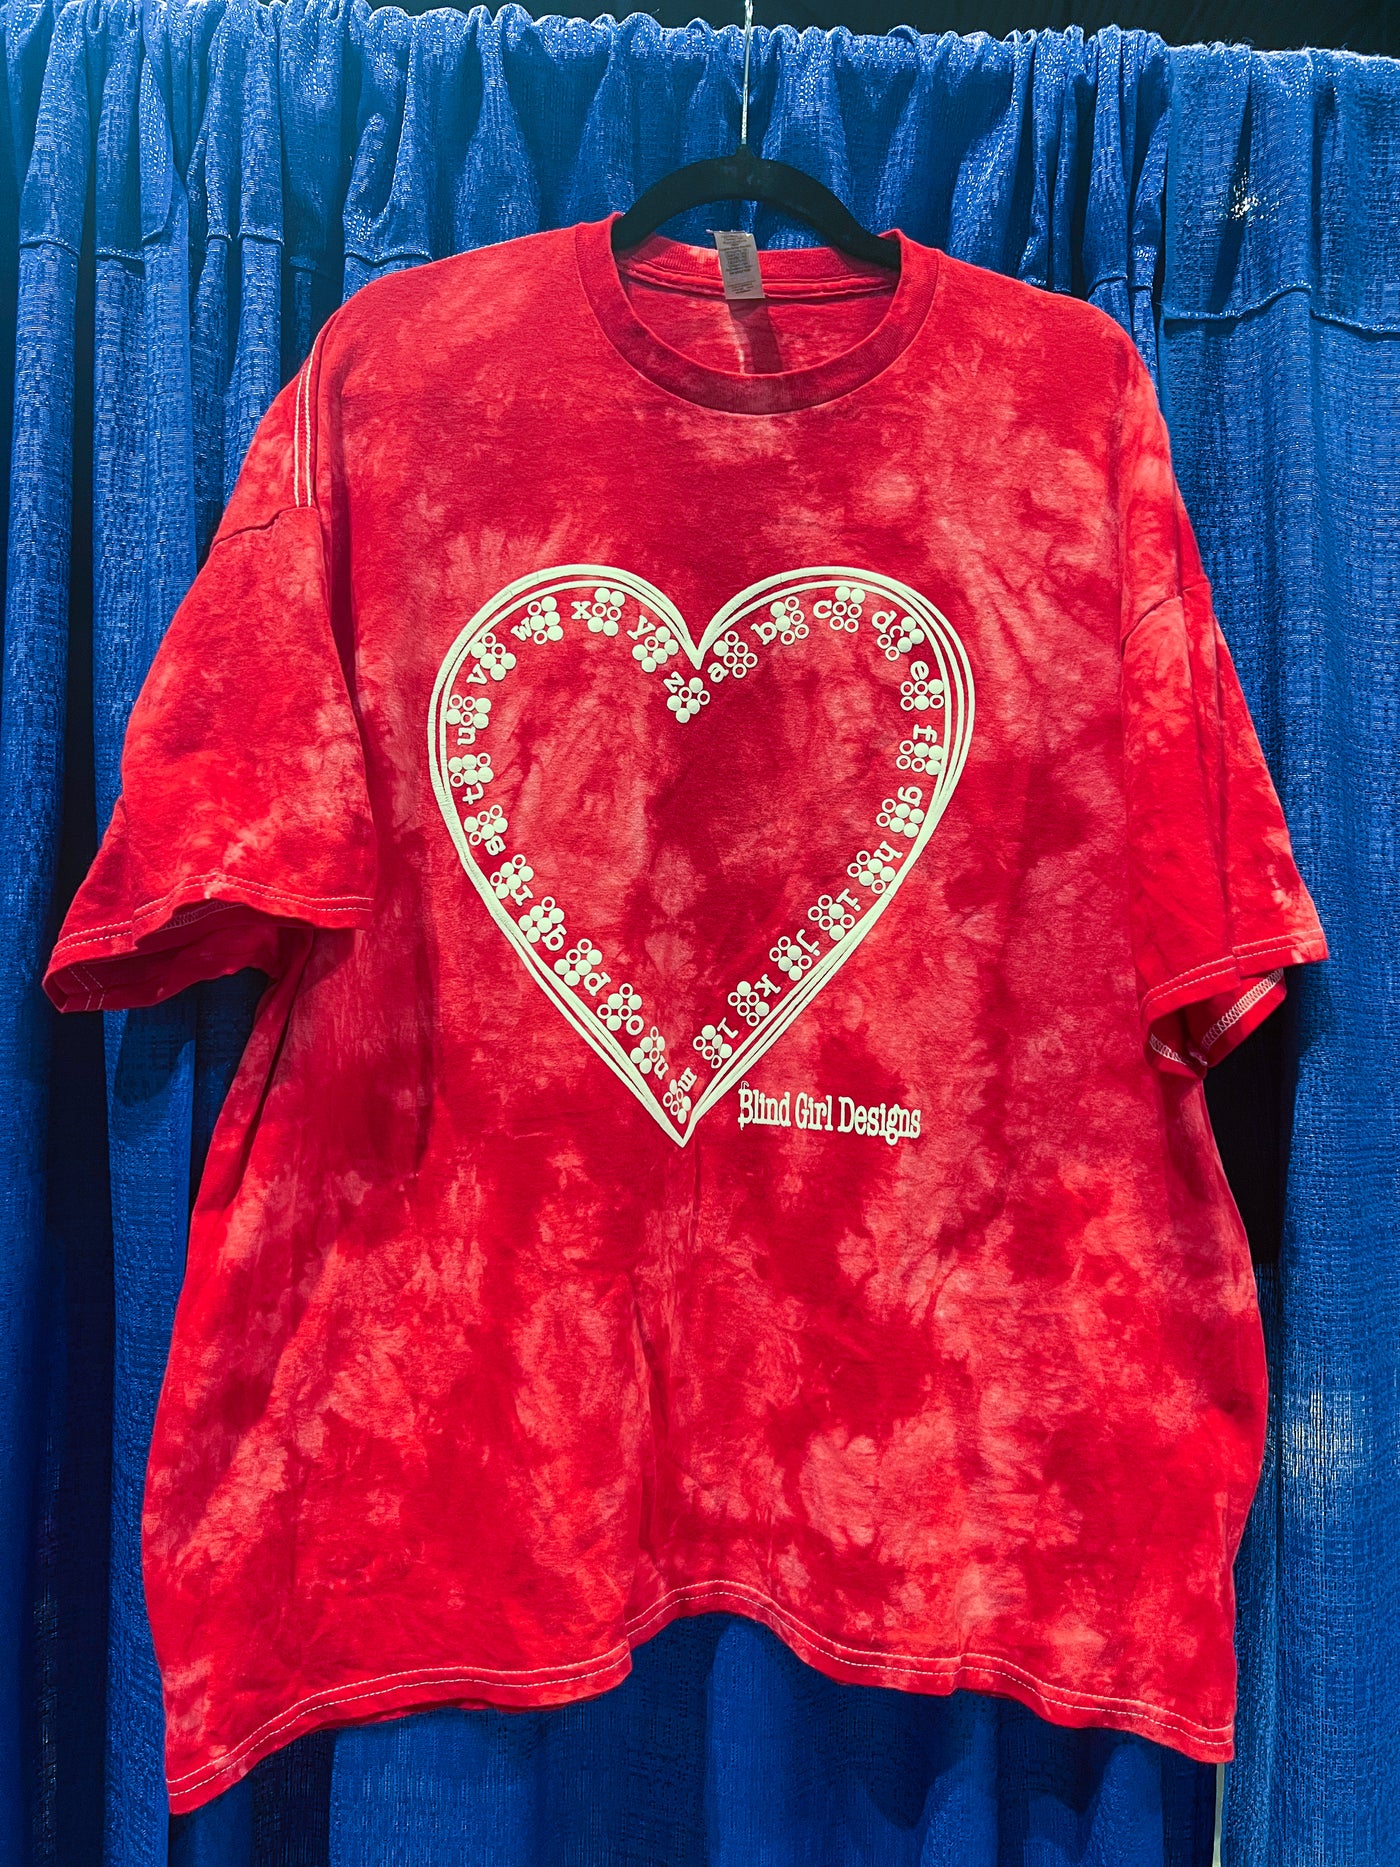 Braille Hearts T-Shirt - Dark and Light Red Tie-Dyed